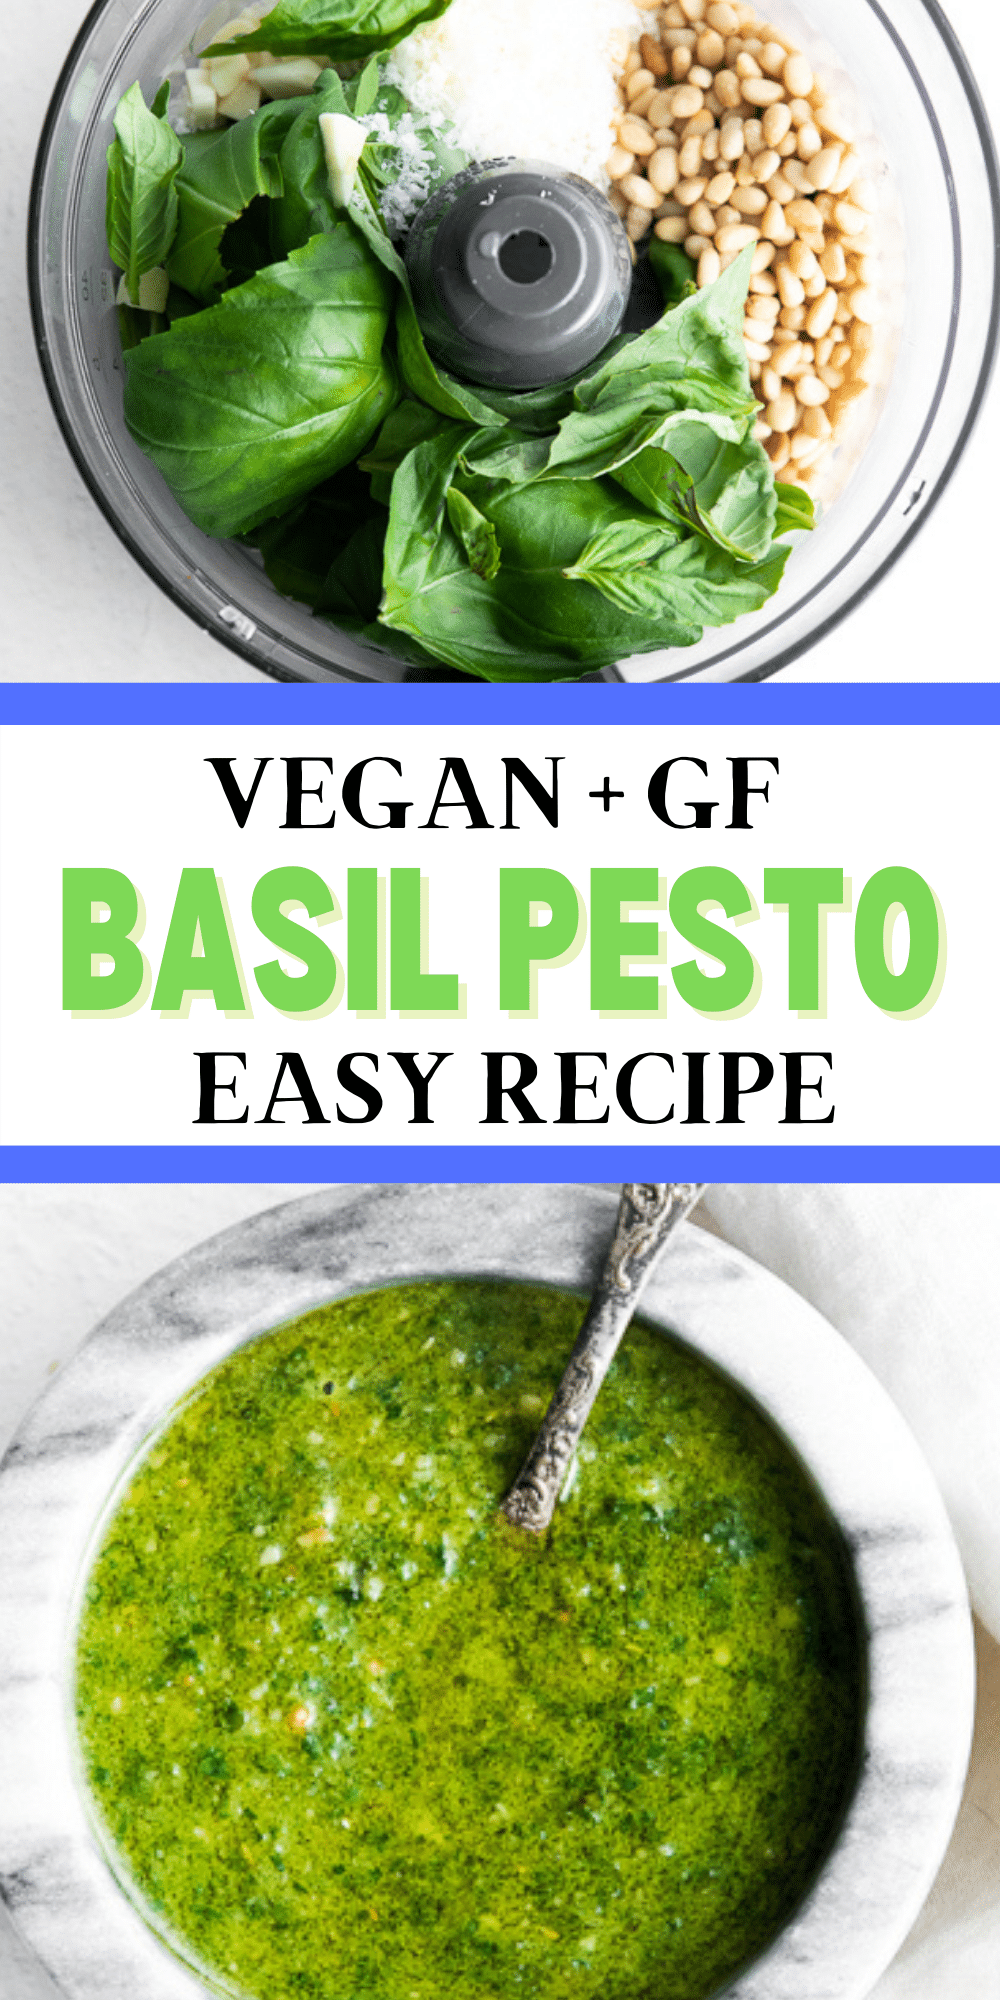 This classic Basil pesto recipe combines fresh herbs, garlic, roasted pine nuts, and cheese to create the most amazing savory, bright, delicious pesto hat you'll want to eat with everything! #pesto #basilpesto